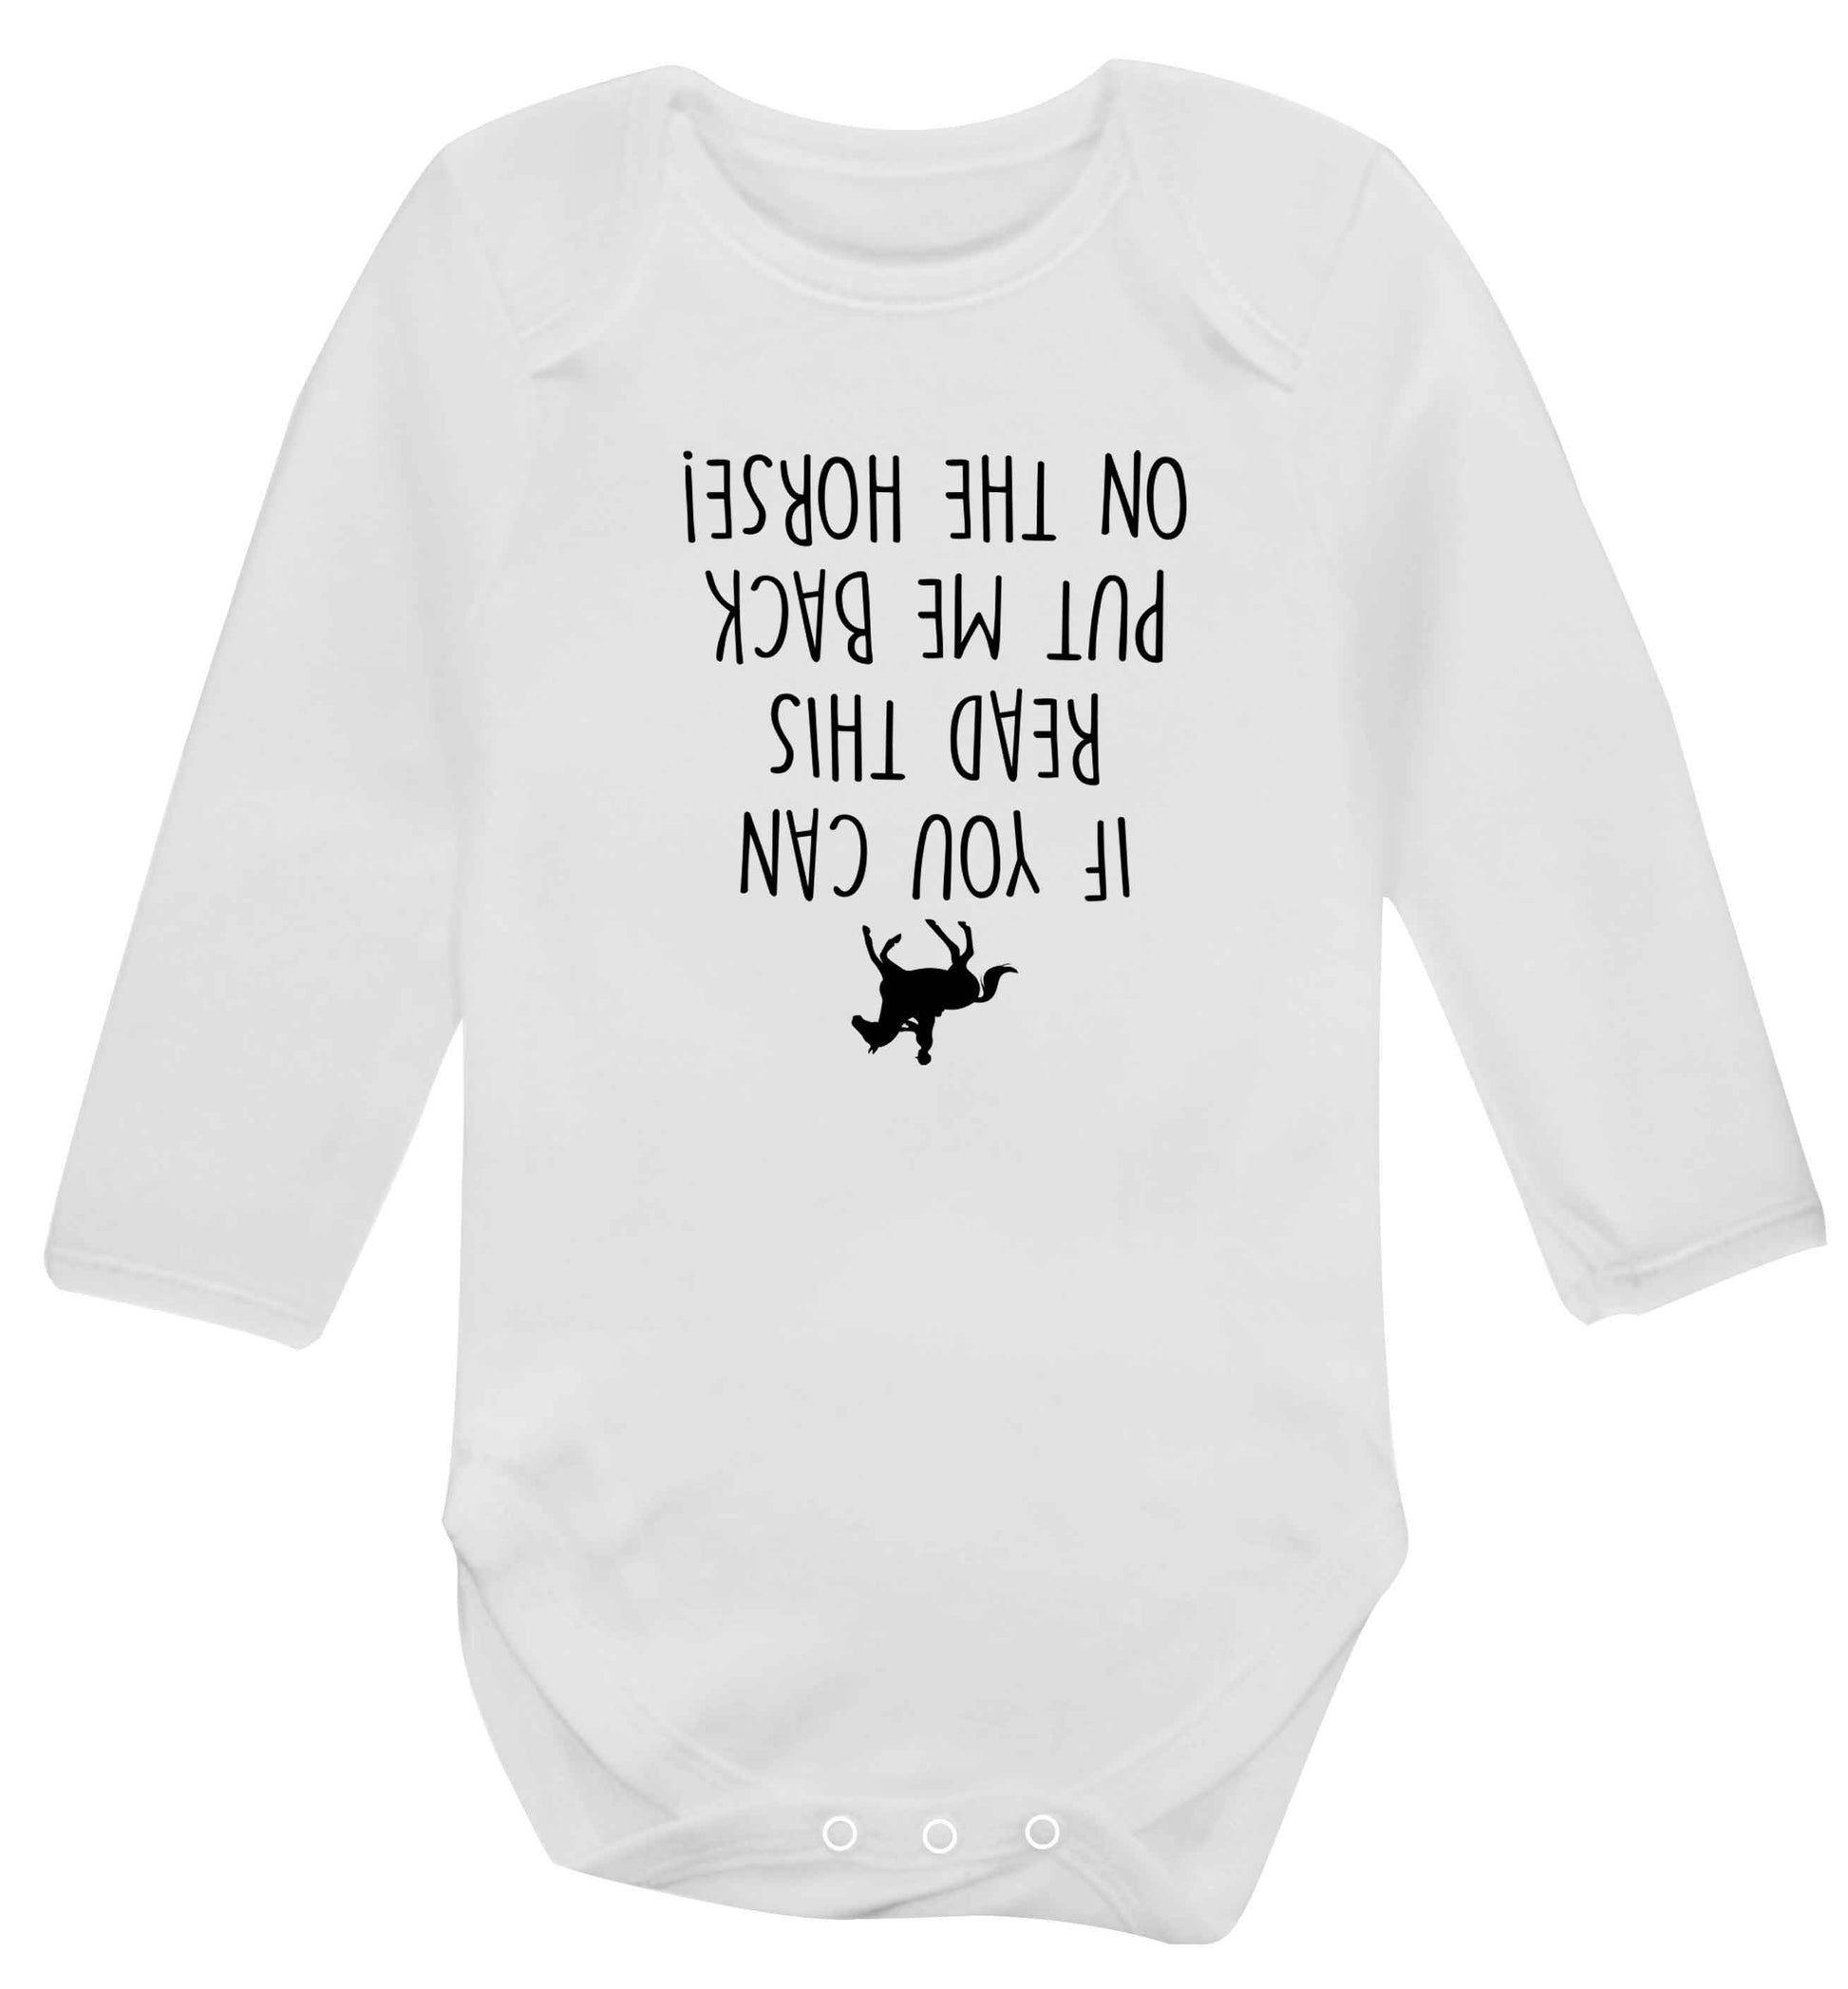 If you can read this put me back on the horse baby vest long sleeved white 6-12 months